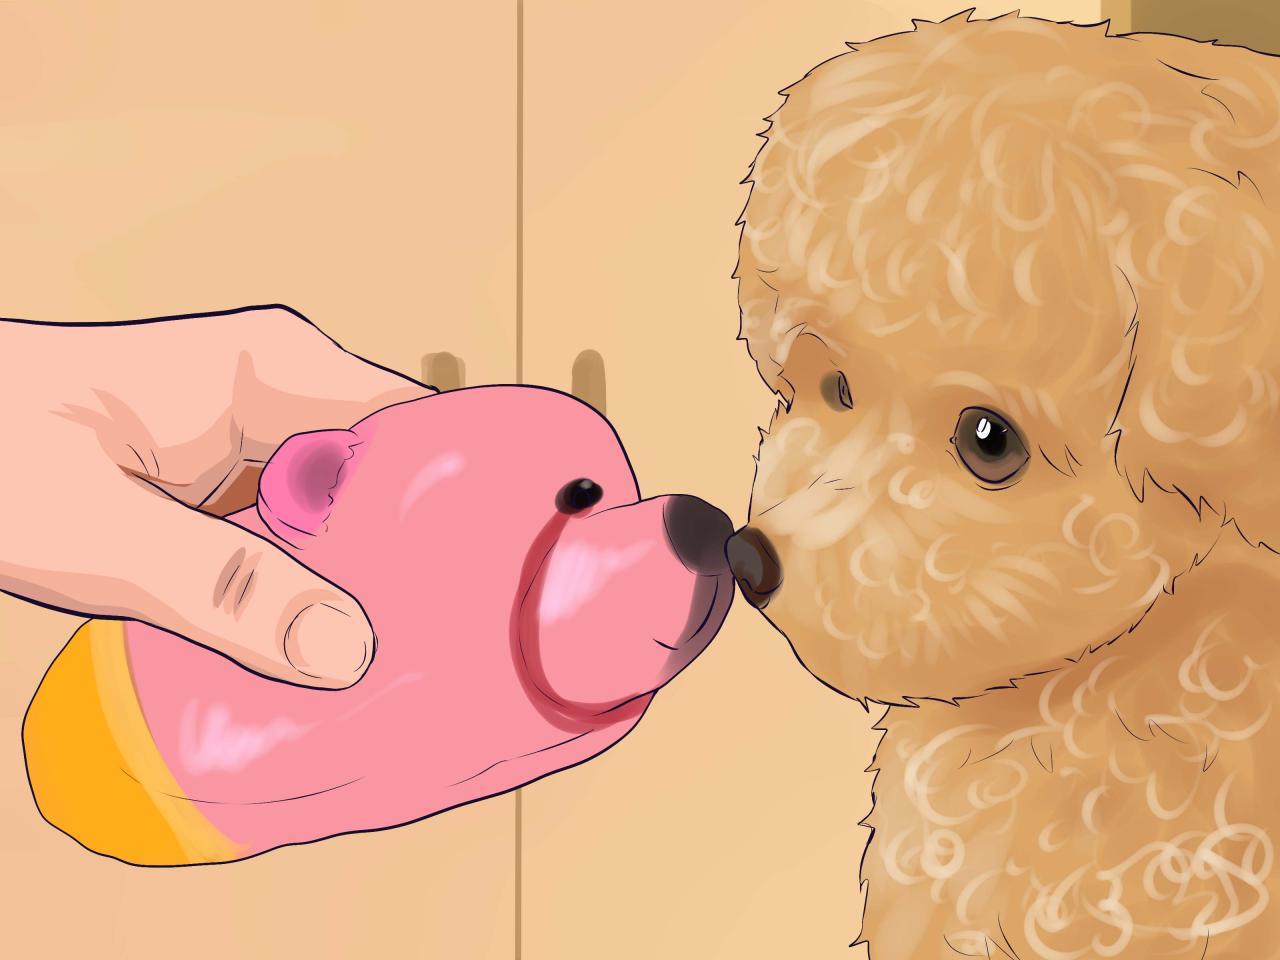 6 Ways To Care For A Toy Poodle - Wikihow